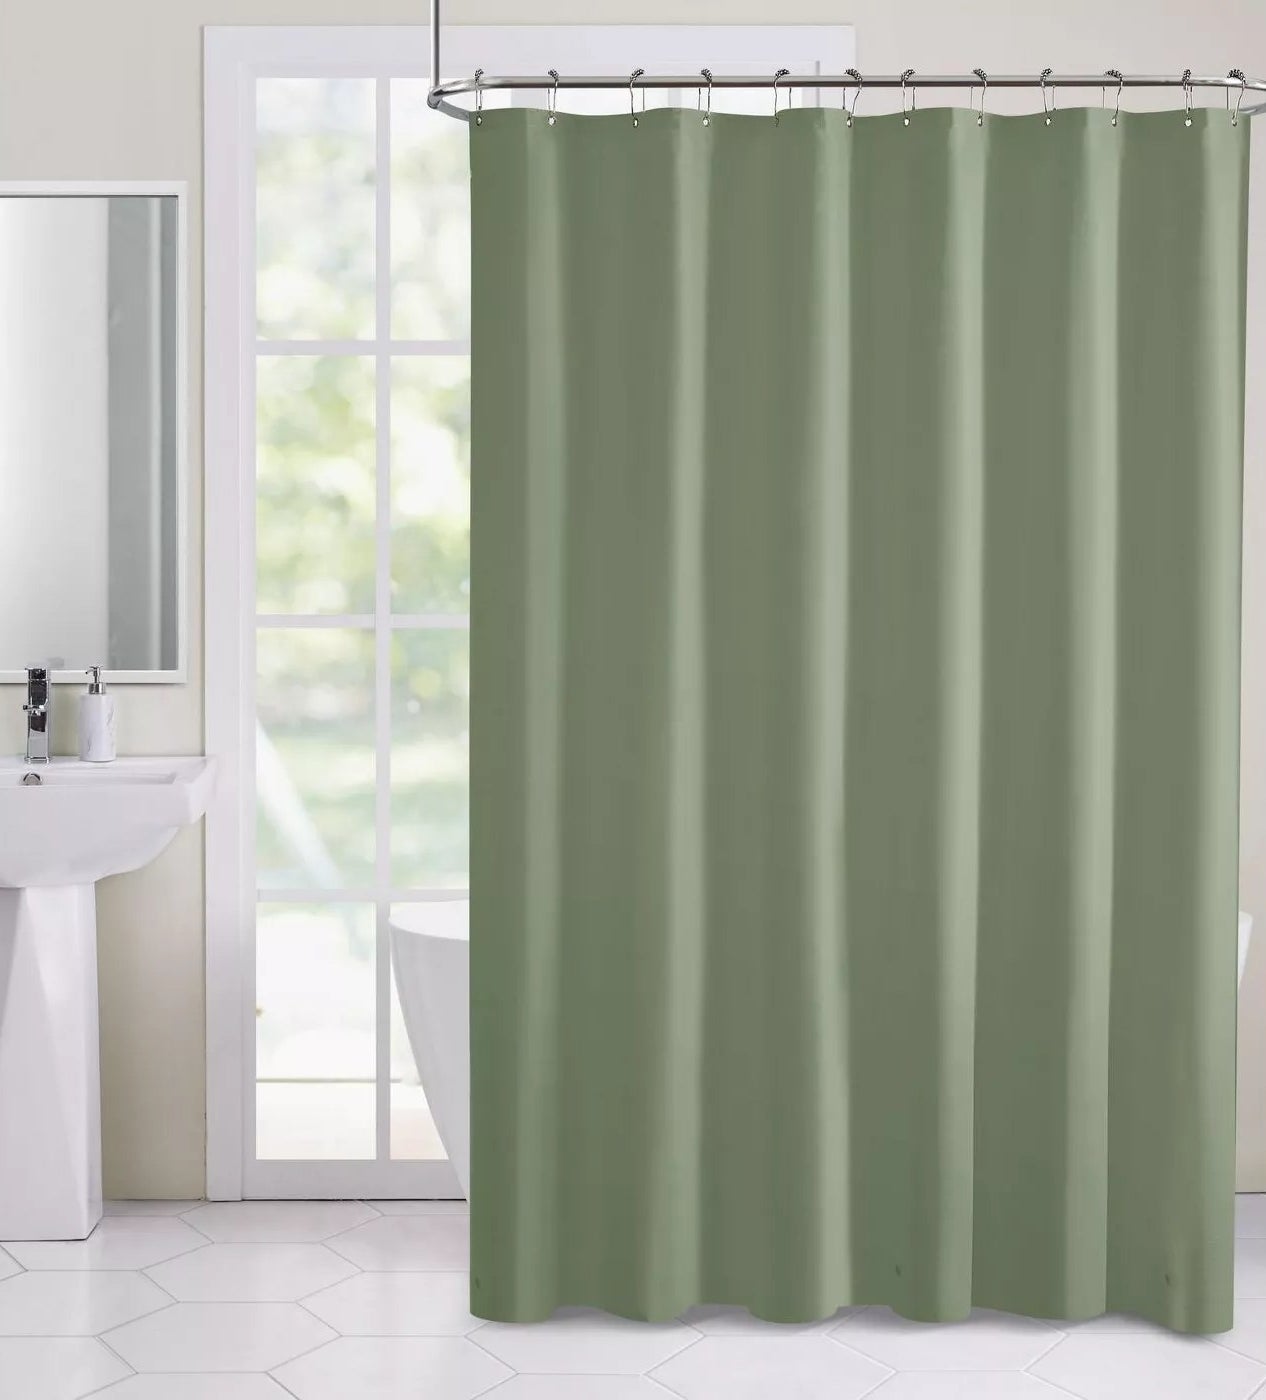 The sage green curtain